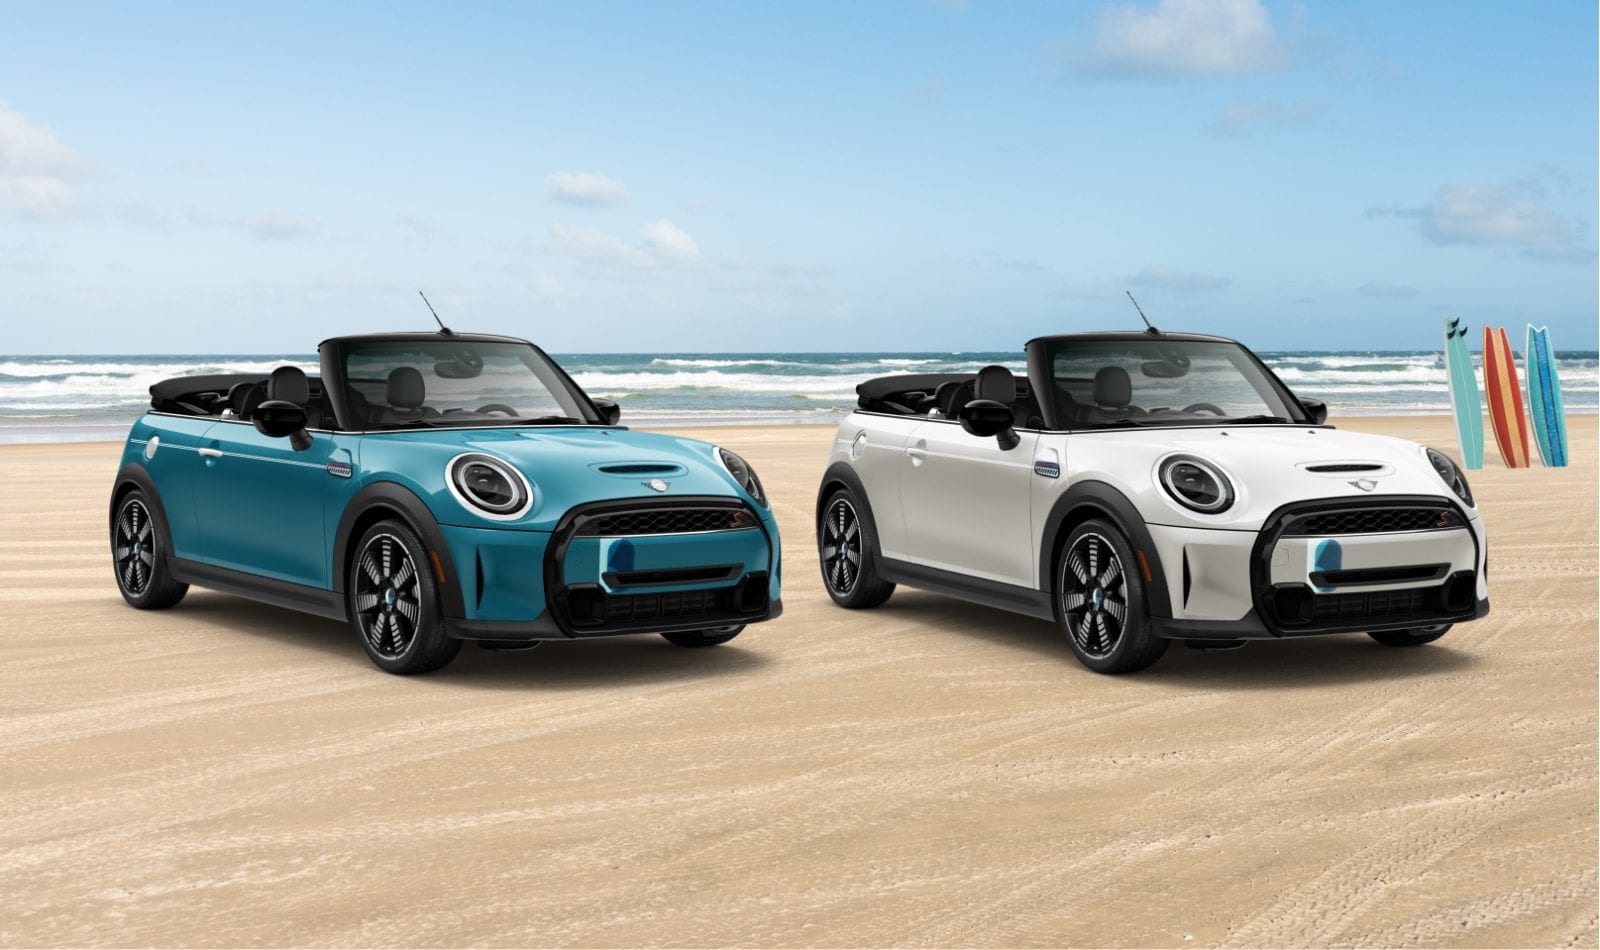 Three-quarters front view of a MINI Cooper S Convertible Seaside Special Edition in Caribbean Aqua parked on a beach next to a MINI Cooper S Convertible Seaside Special Edition in Nanuq White, with crashing waves and clear skies in the background.